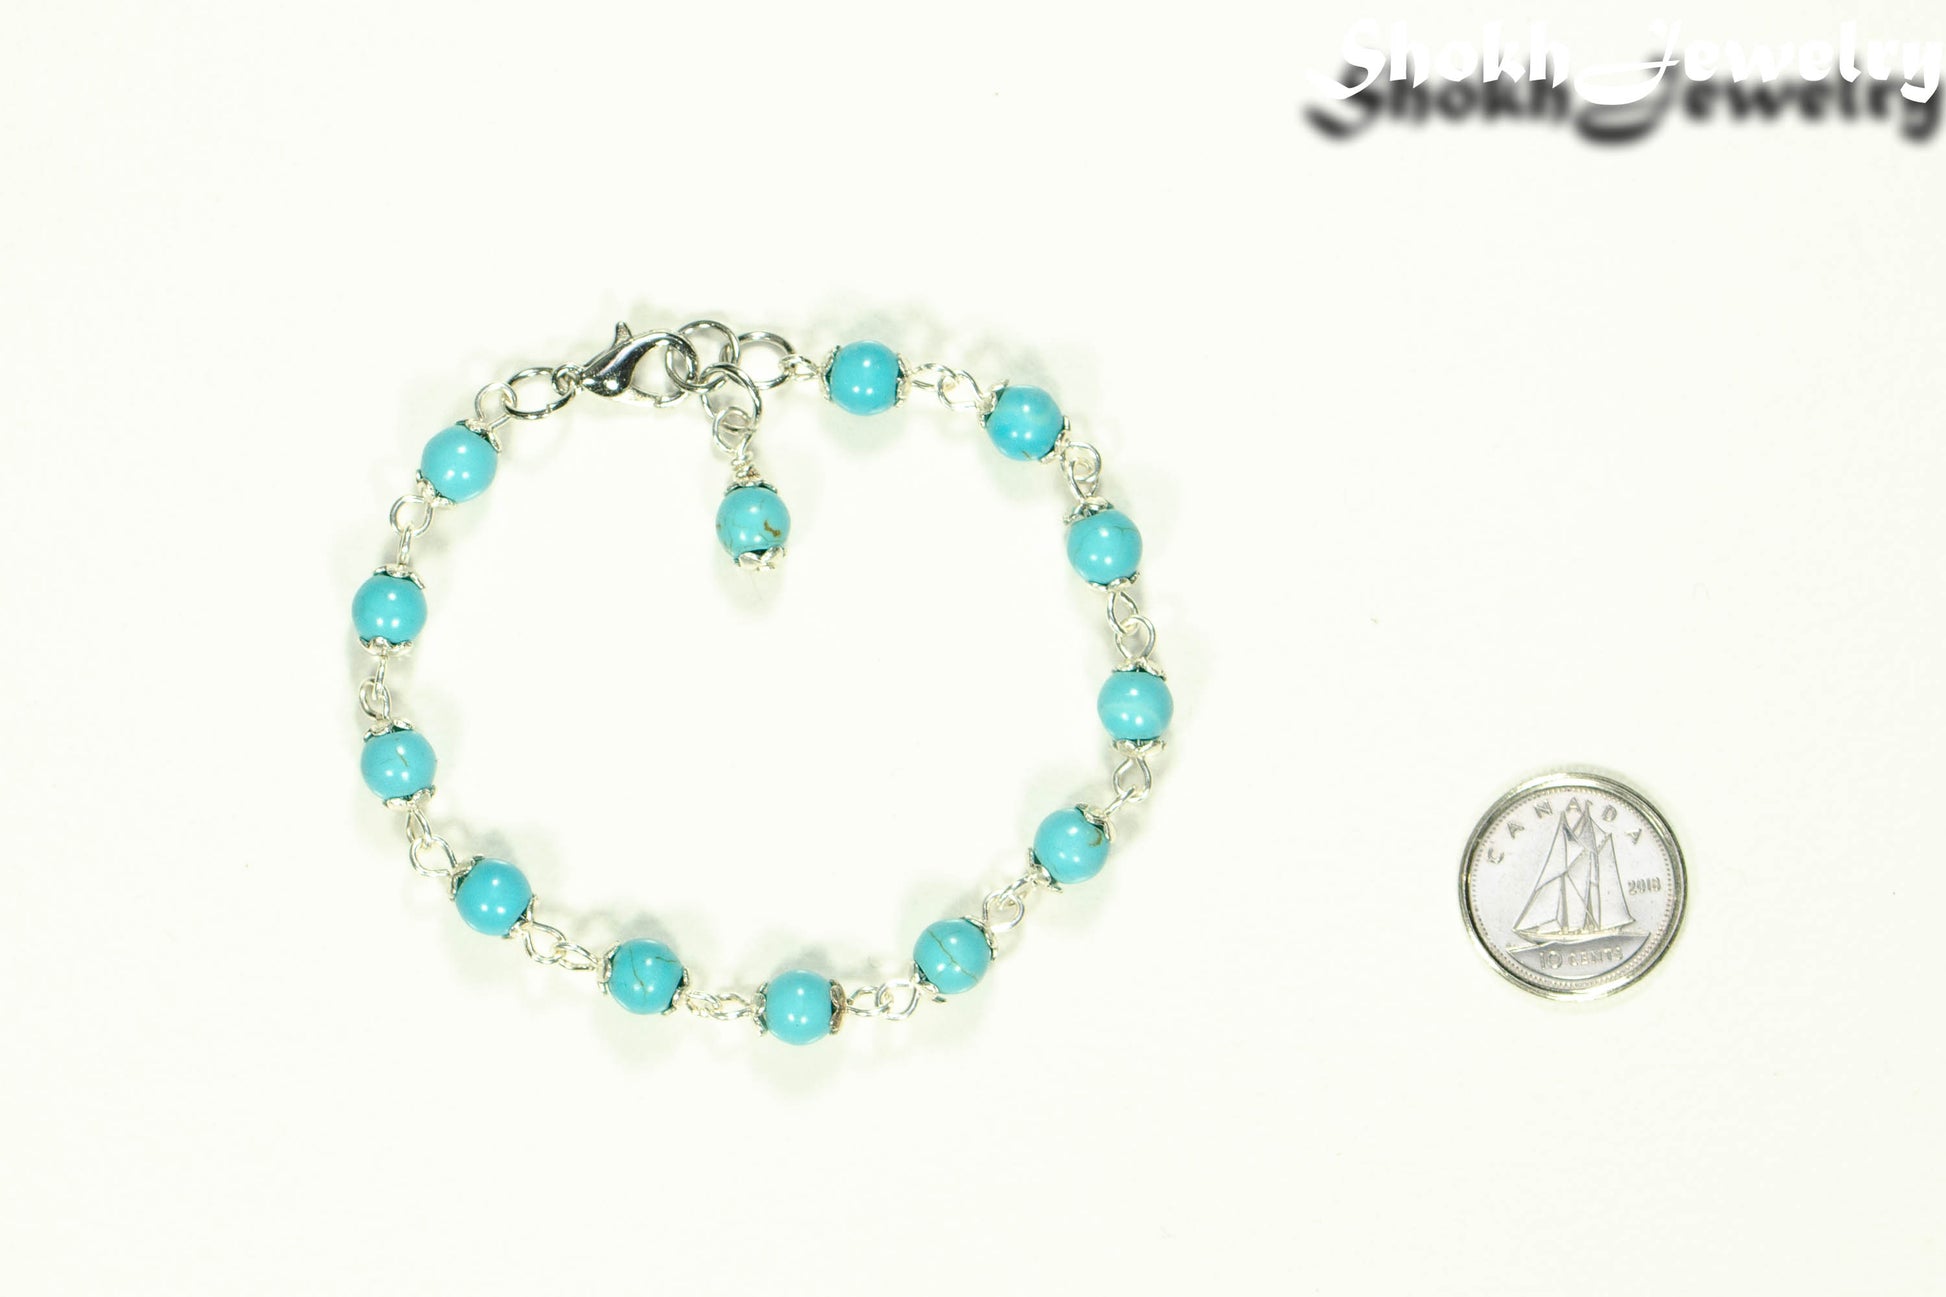 Top view of 6mm Turquoise Howlite Bracelet.